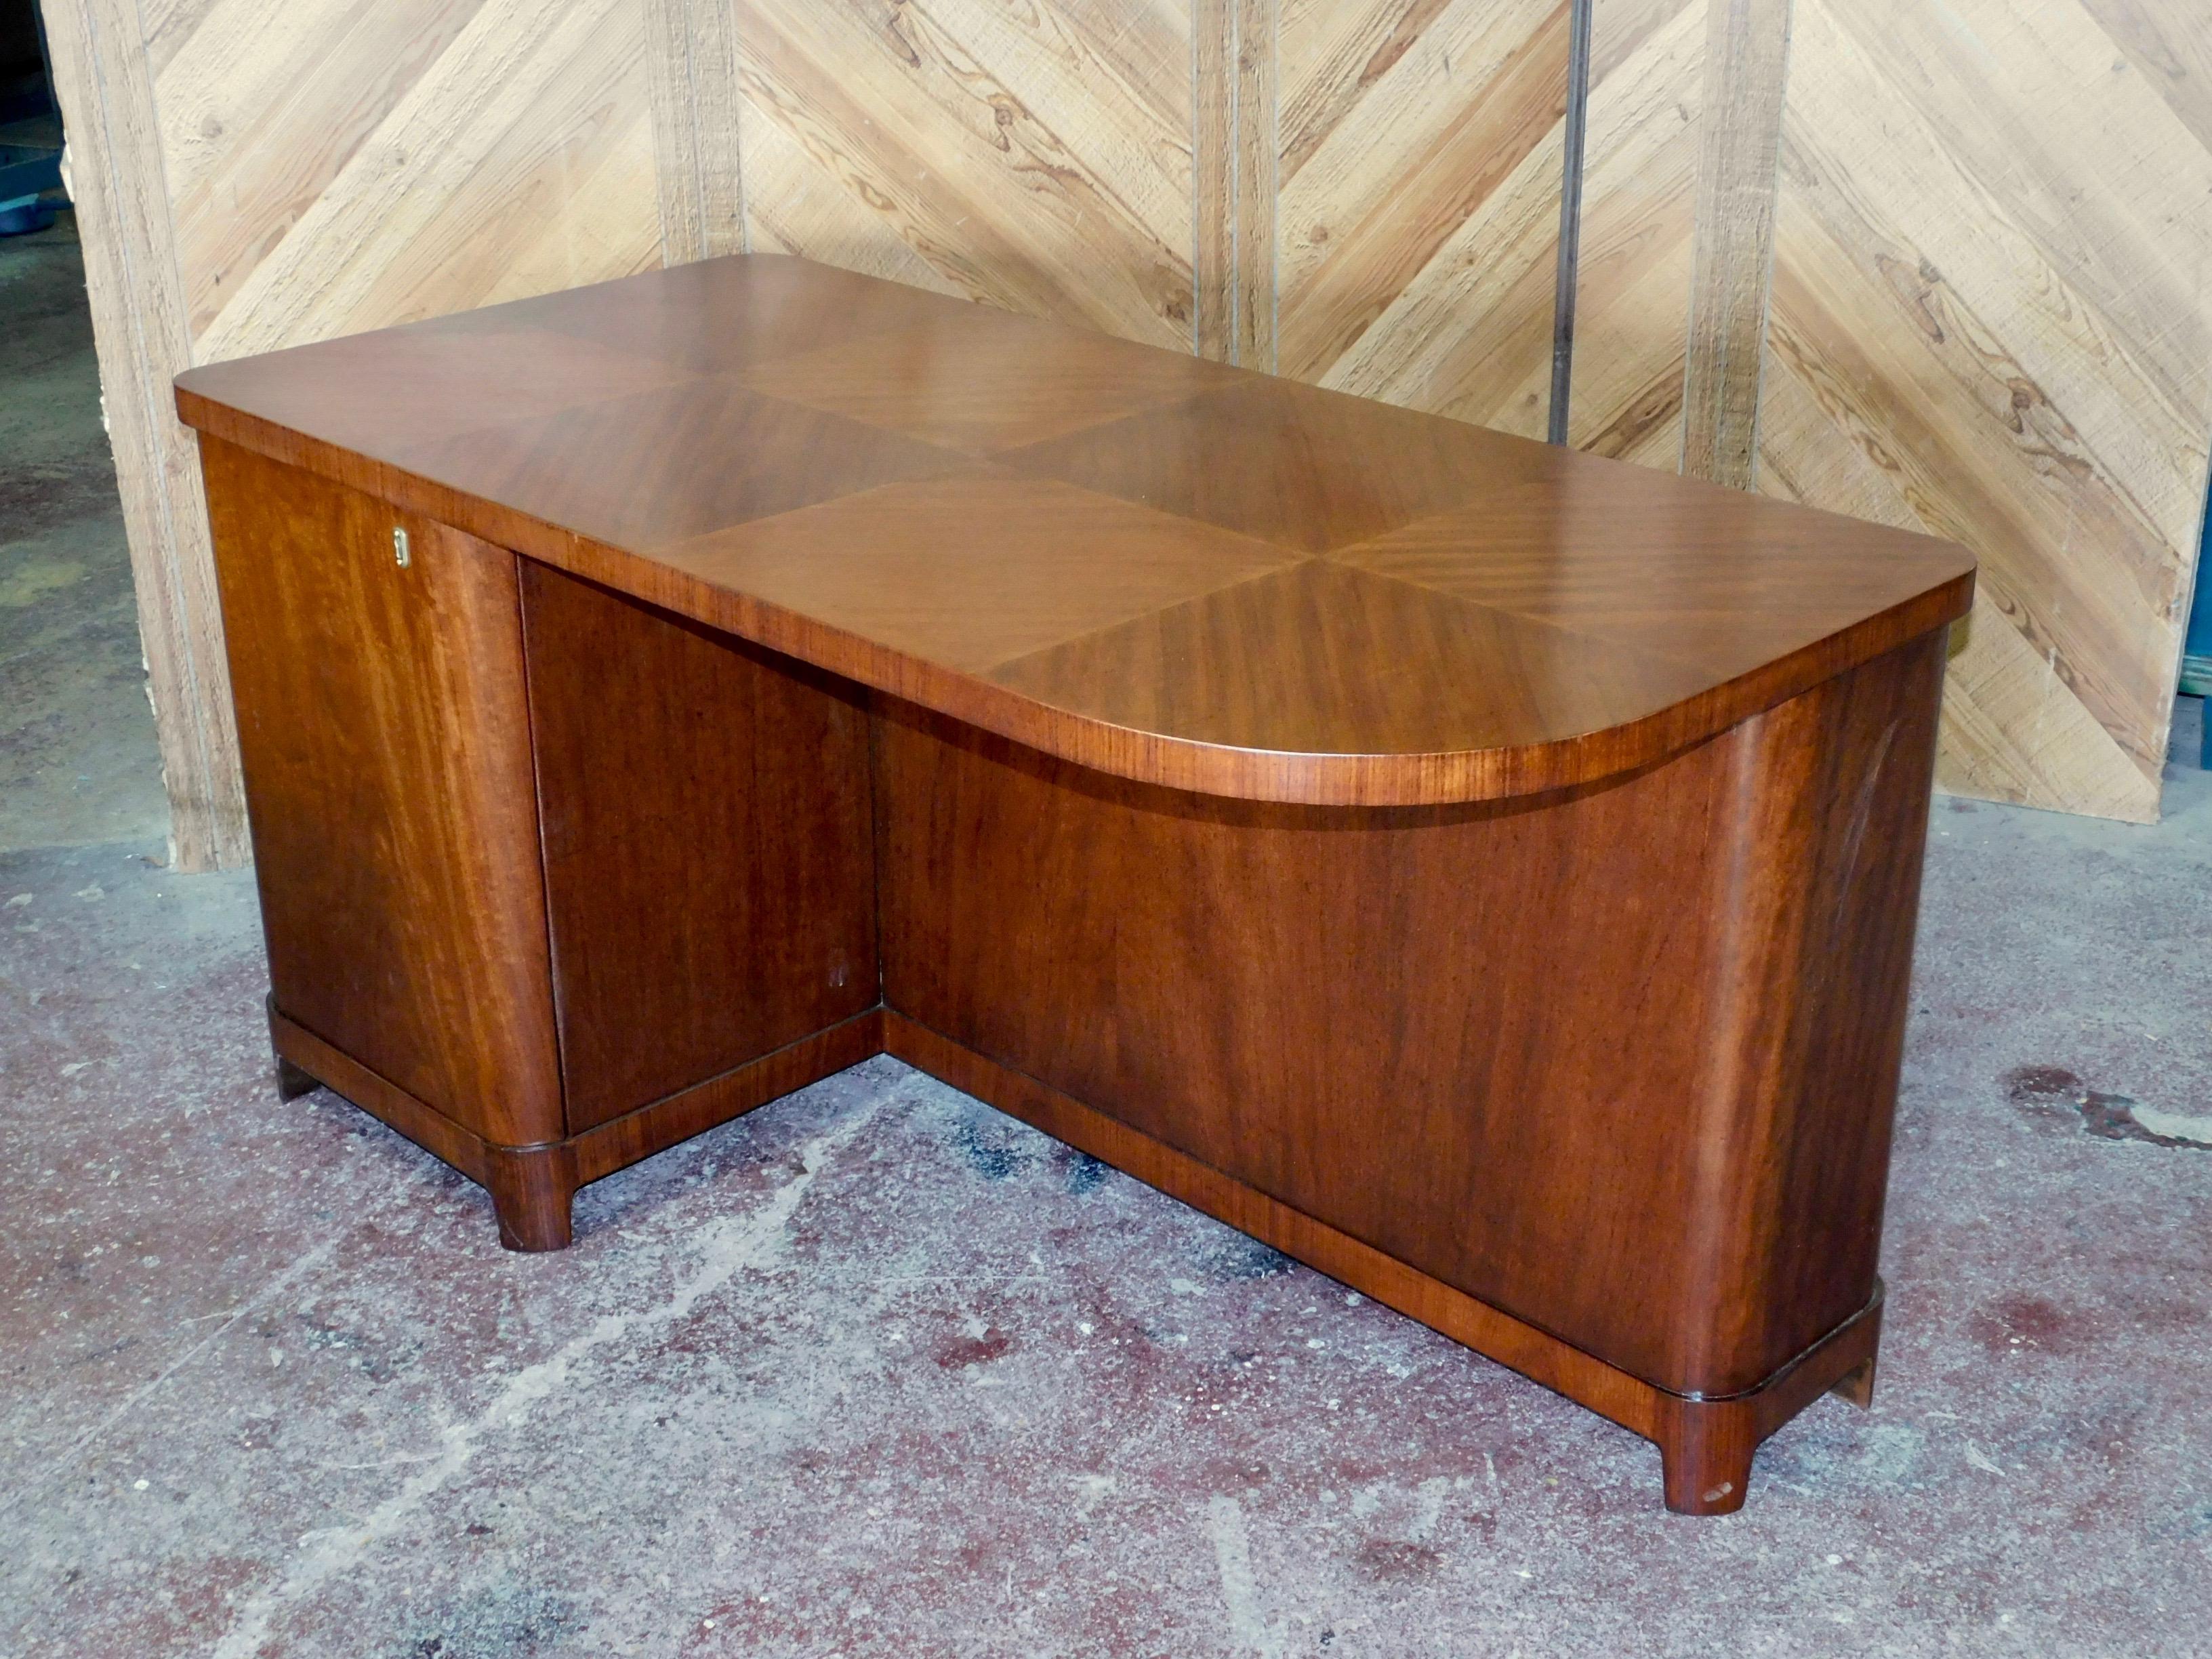 Mid-20th Century Swedish Art Moderne Desk in Flame Mahogany with Built-In Bookcase, circa 1940 For Sale